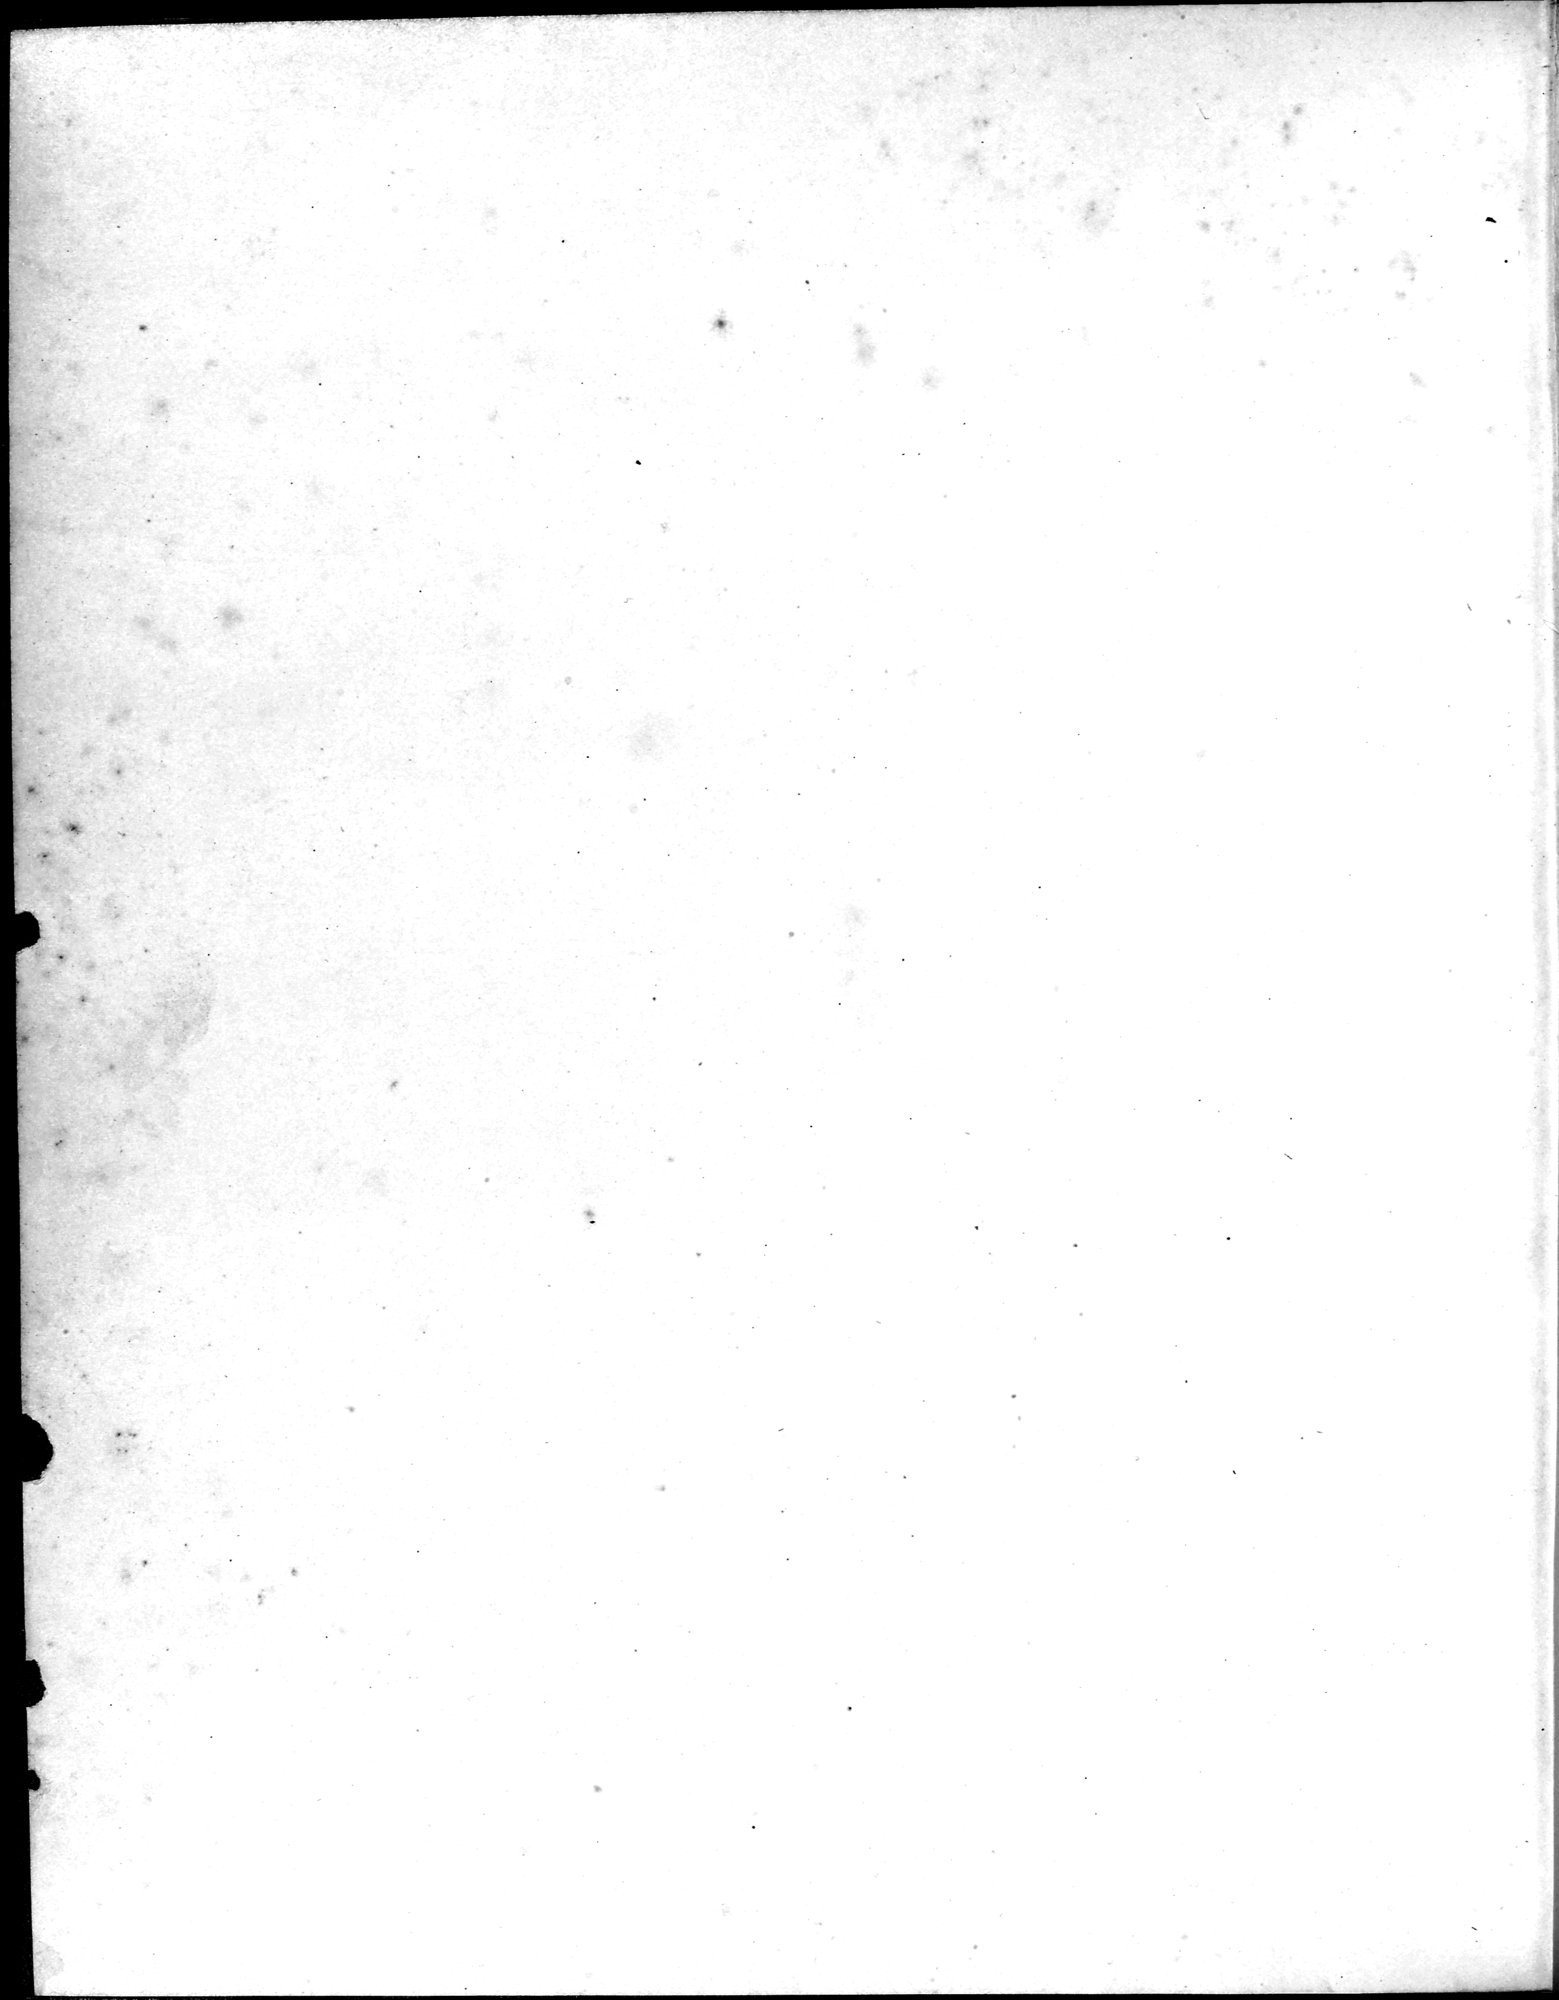 Explorations in Turkestan : Expedition of 1904 : vol.2 / Page 360 (Grayscale High Resolution Image)